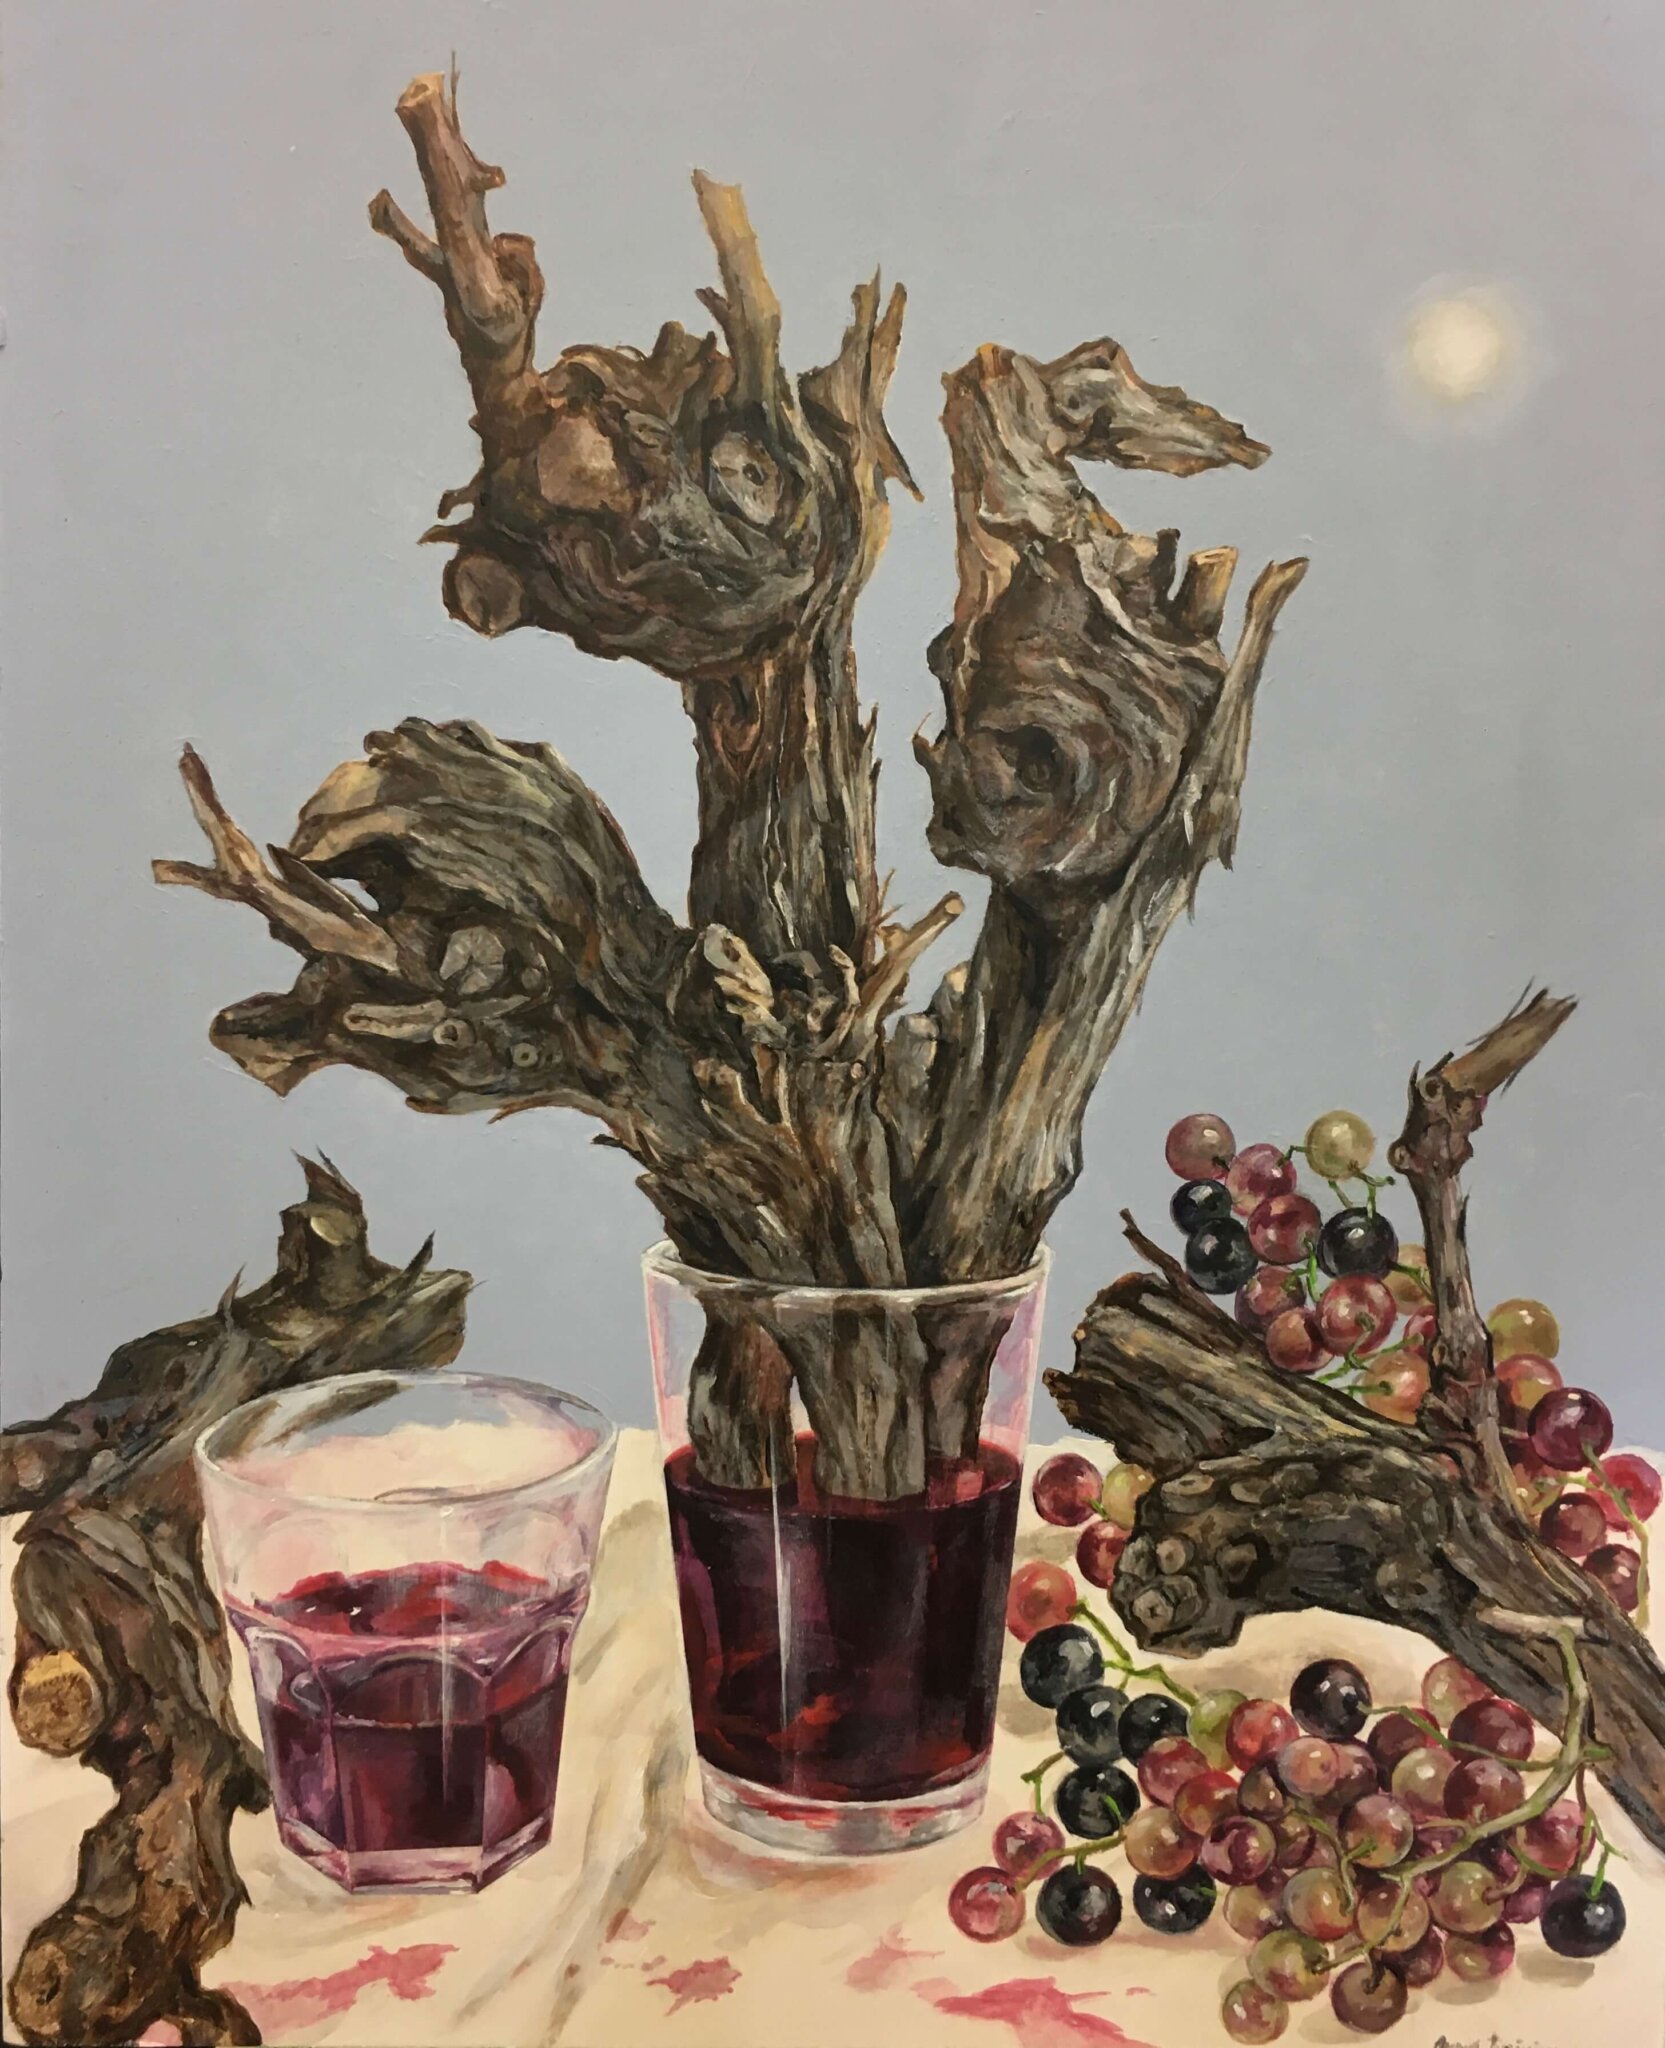 The "Arborescent II" national juried exhibition at Alex Ferrone Gallery has been extended, giving people more time to see stunning works like this painting by Anna Jurinich.